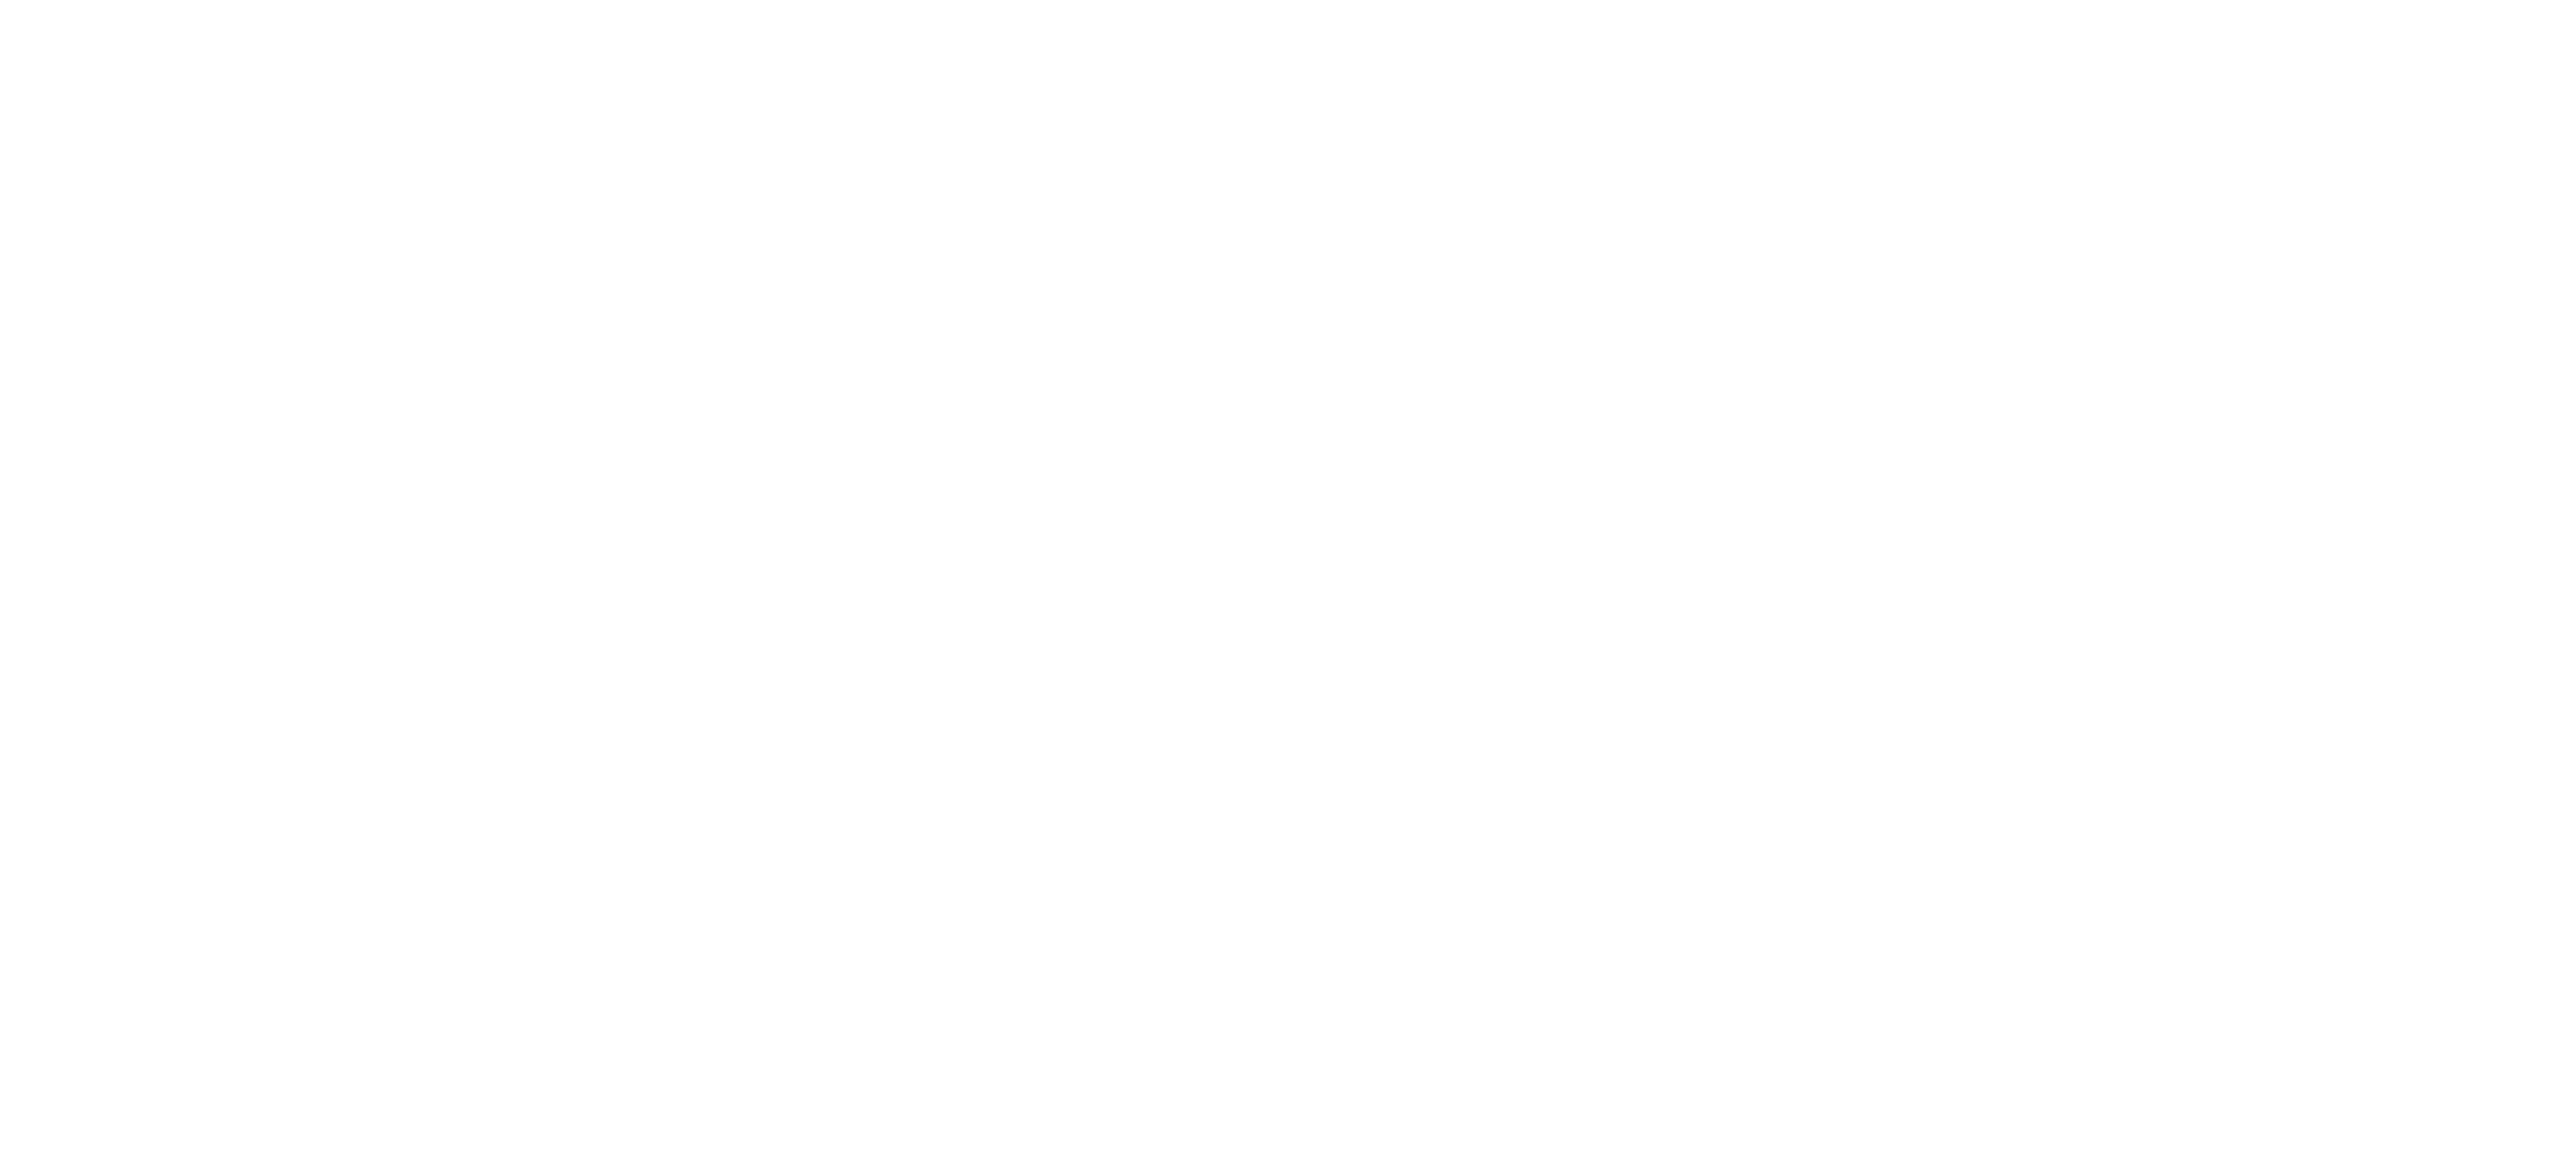 GRD Thermique